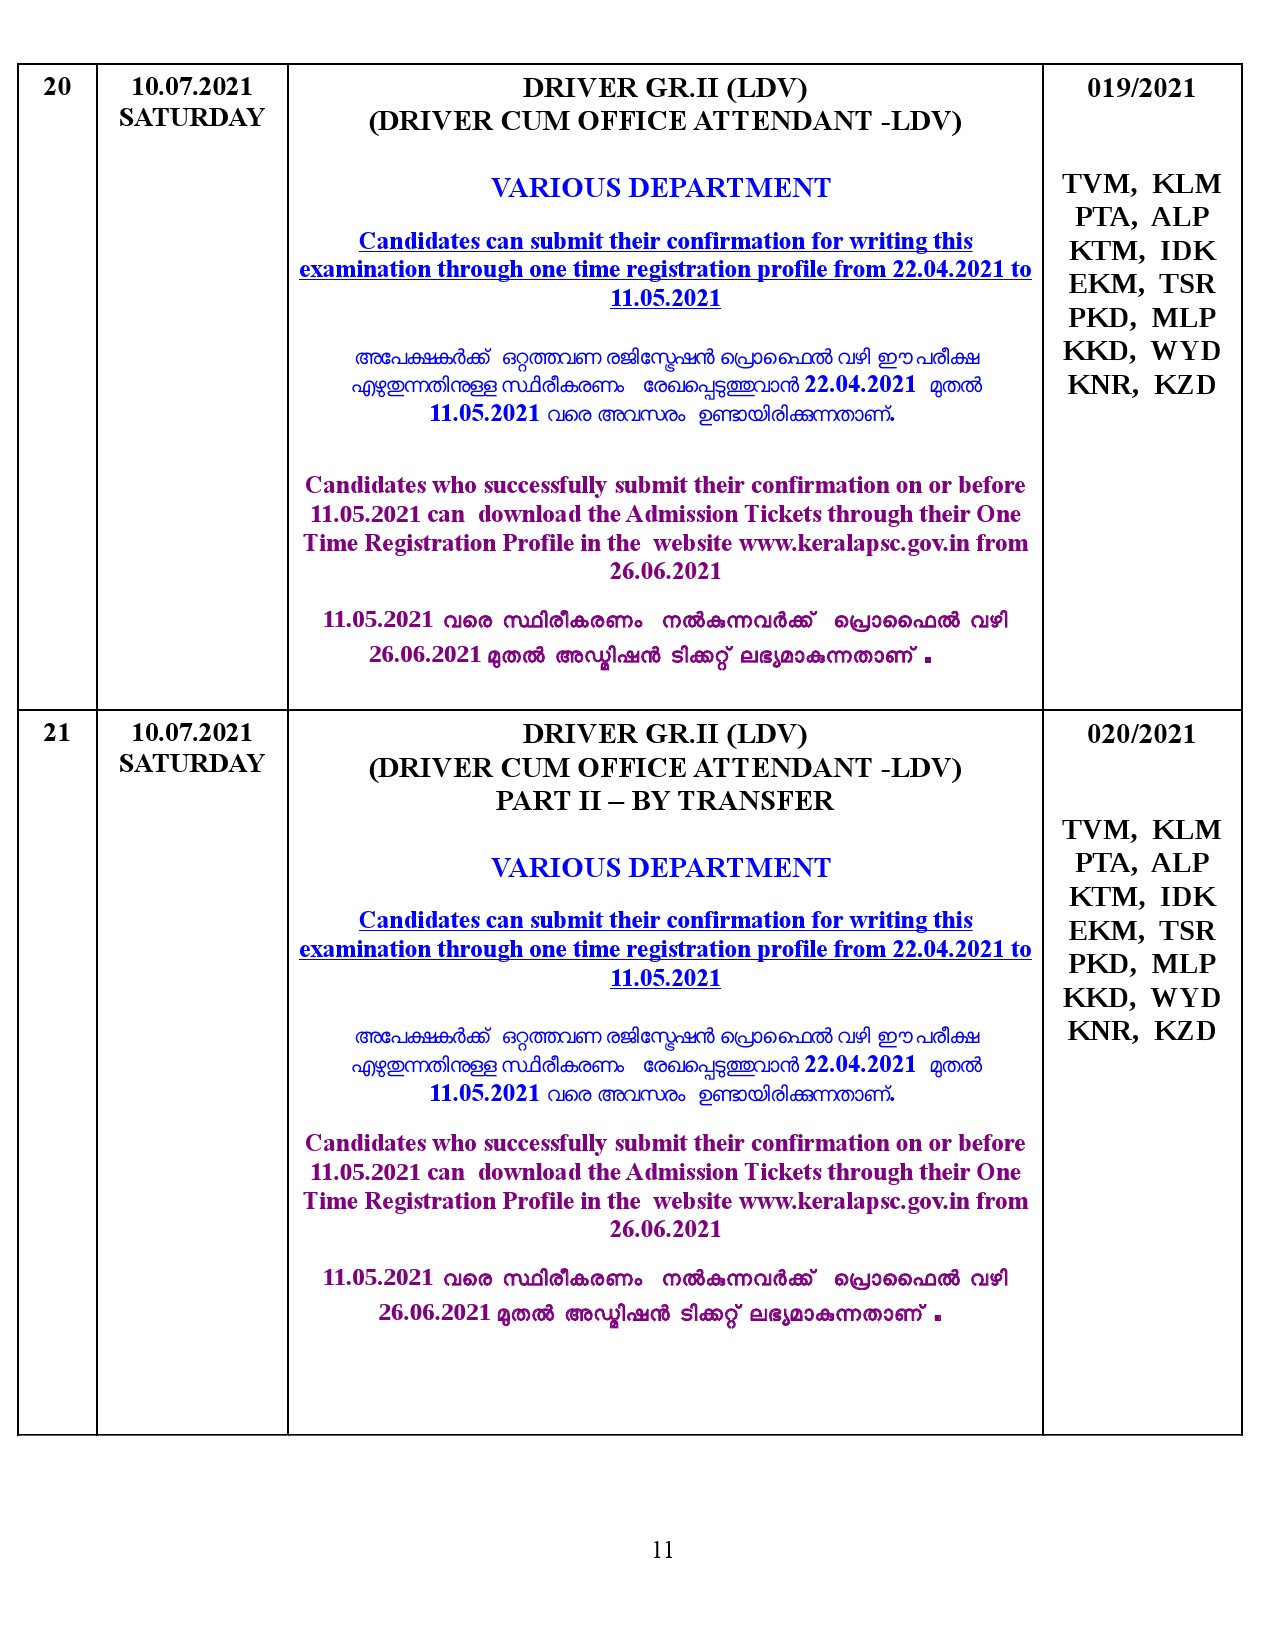 KPSC Examination Programme For The Month Of July 2021 - Notification Image 11